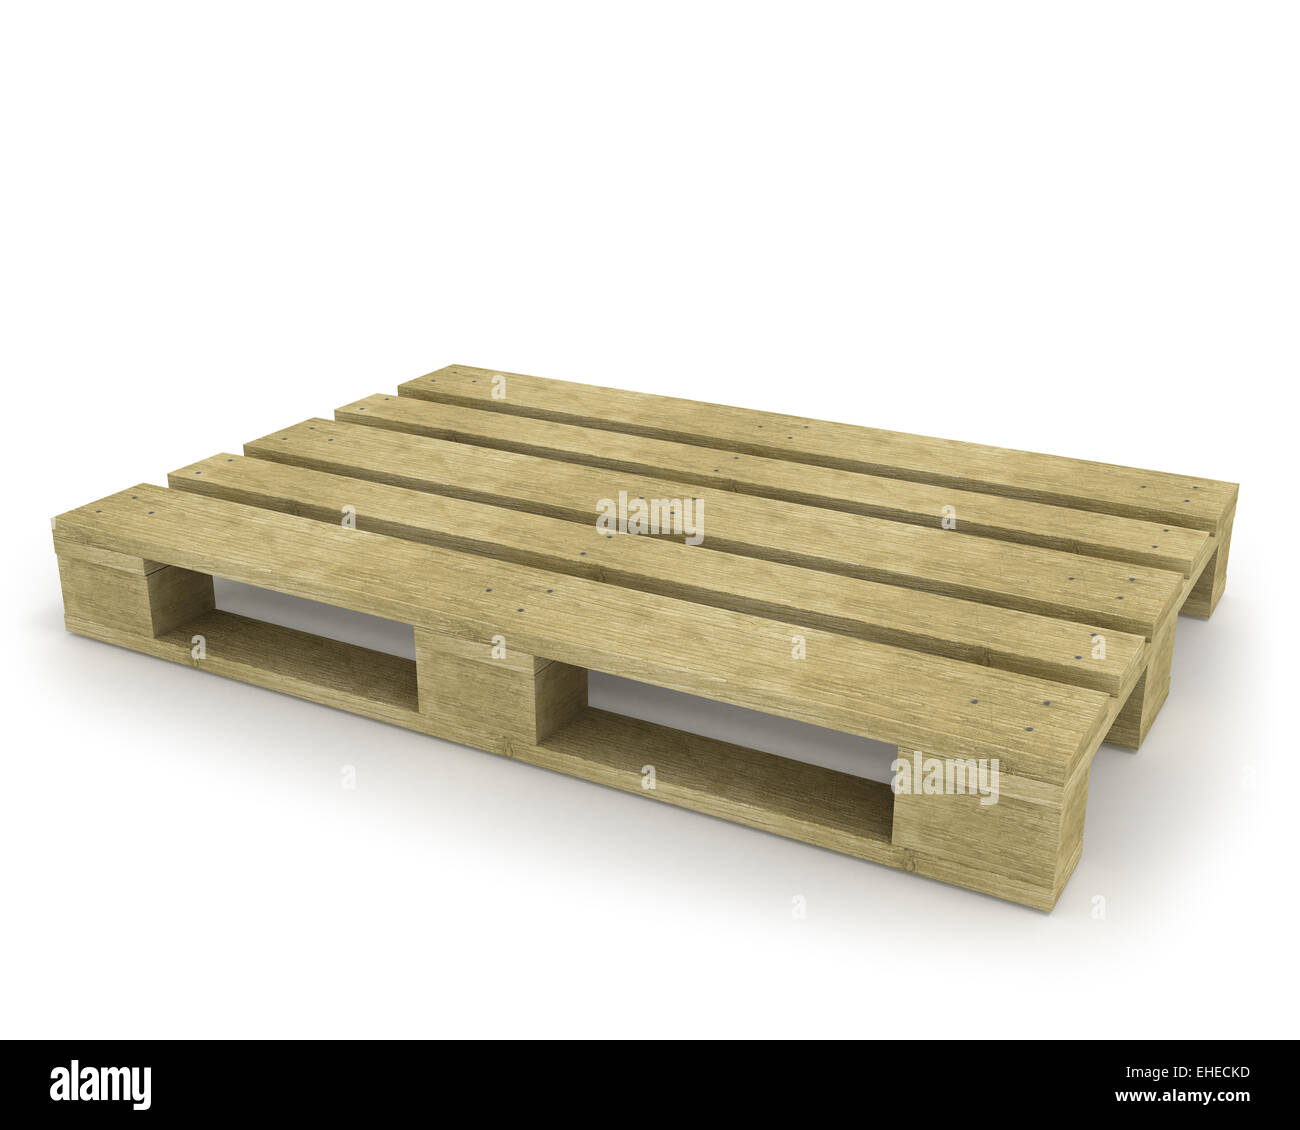 Wooden pallet isolated on white Stock Photo